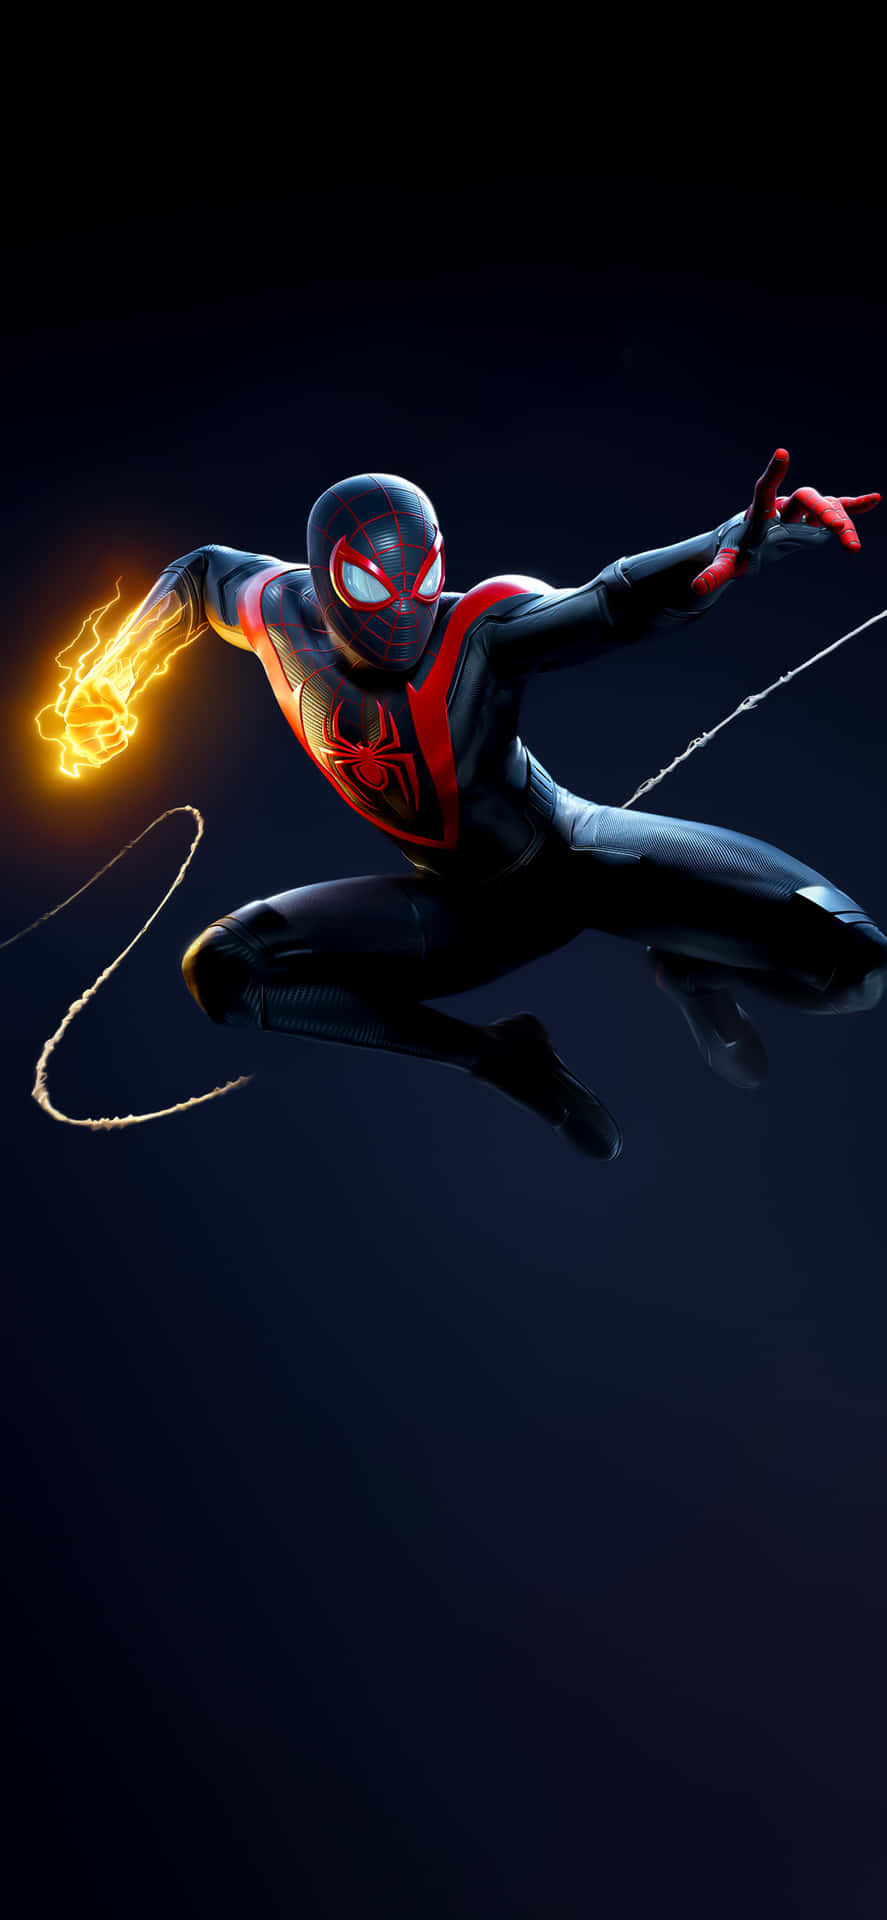 Play The Amazing Spider-Man Game On Your iPhone Wallpaper